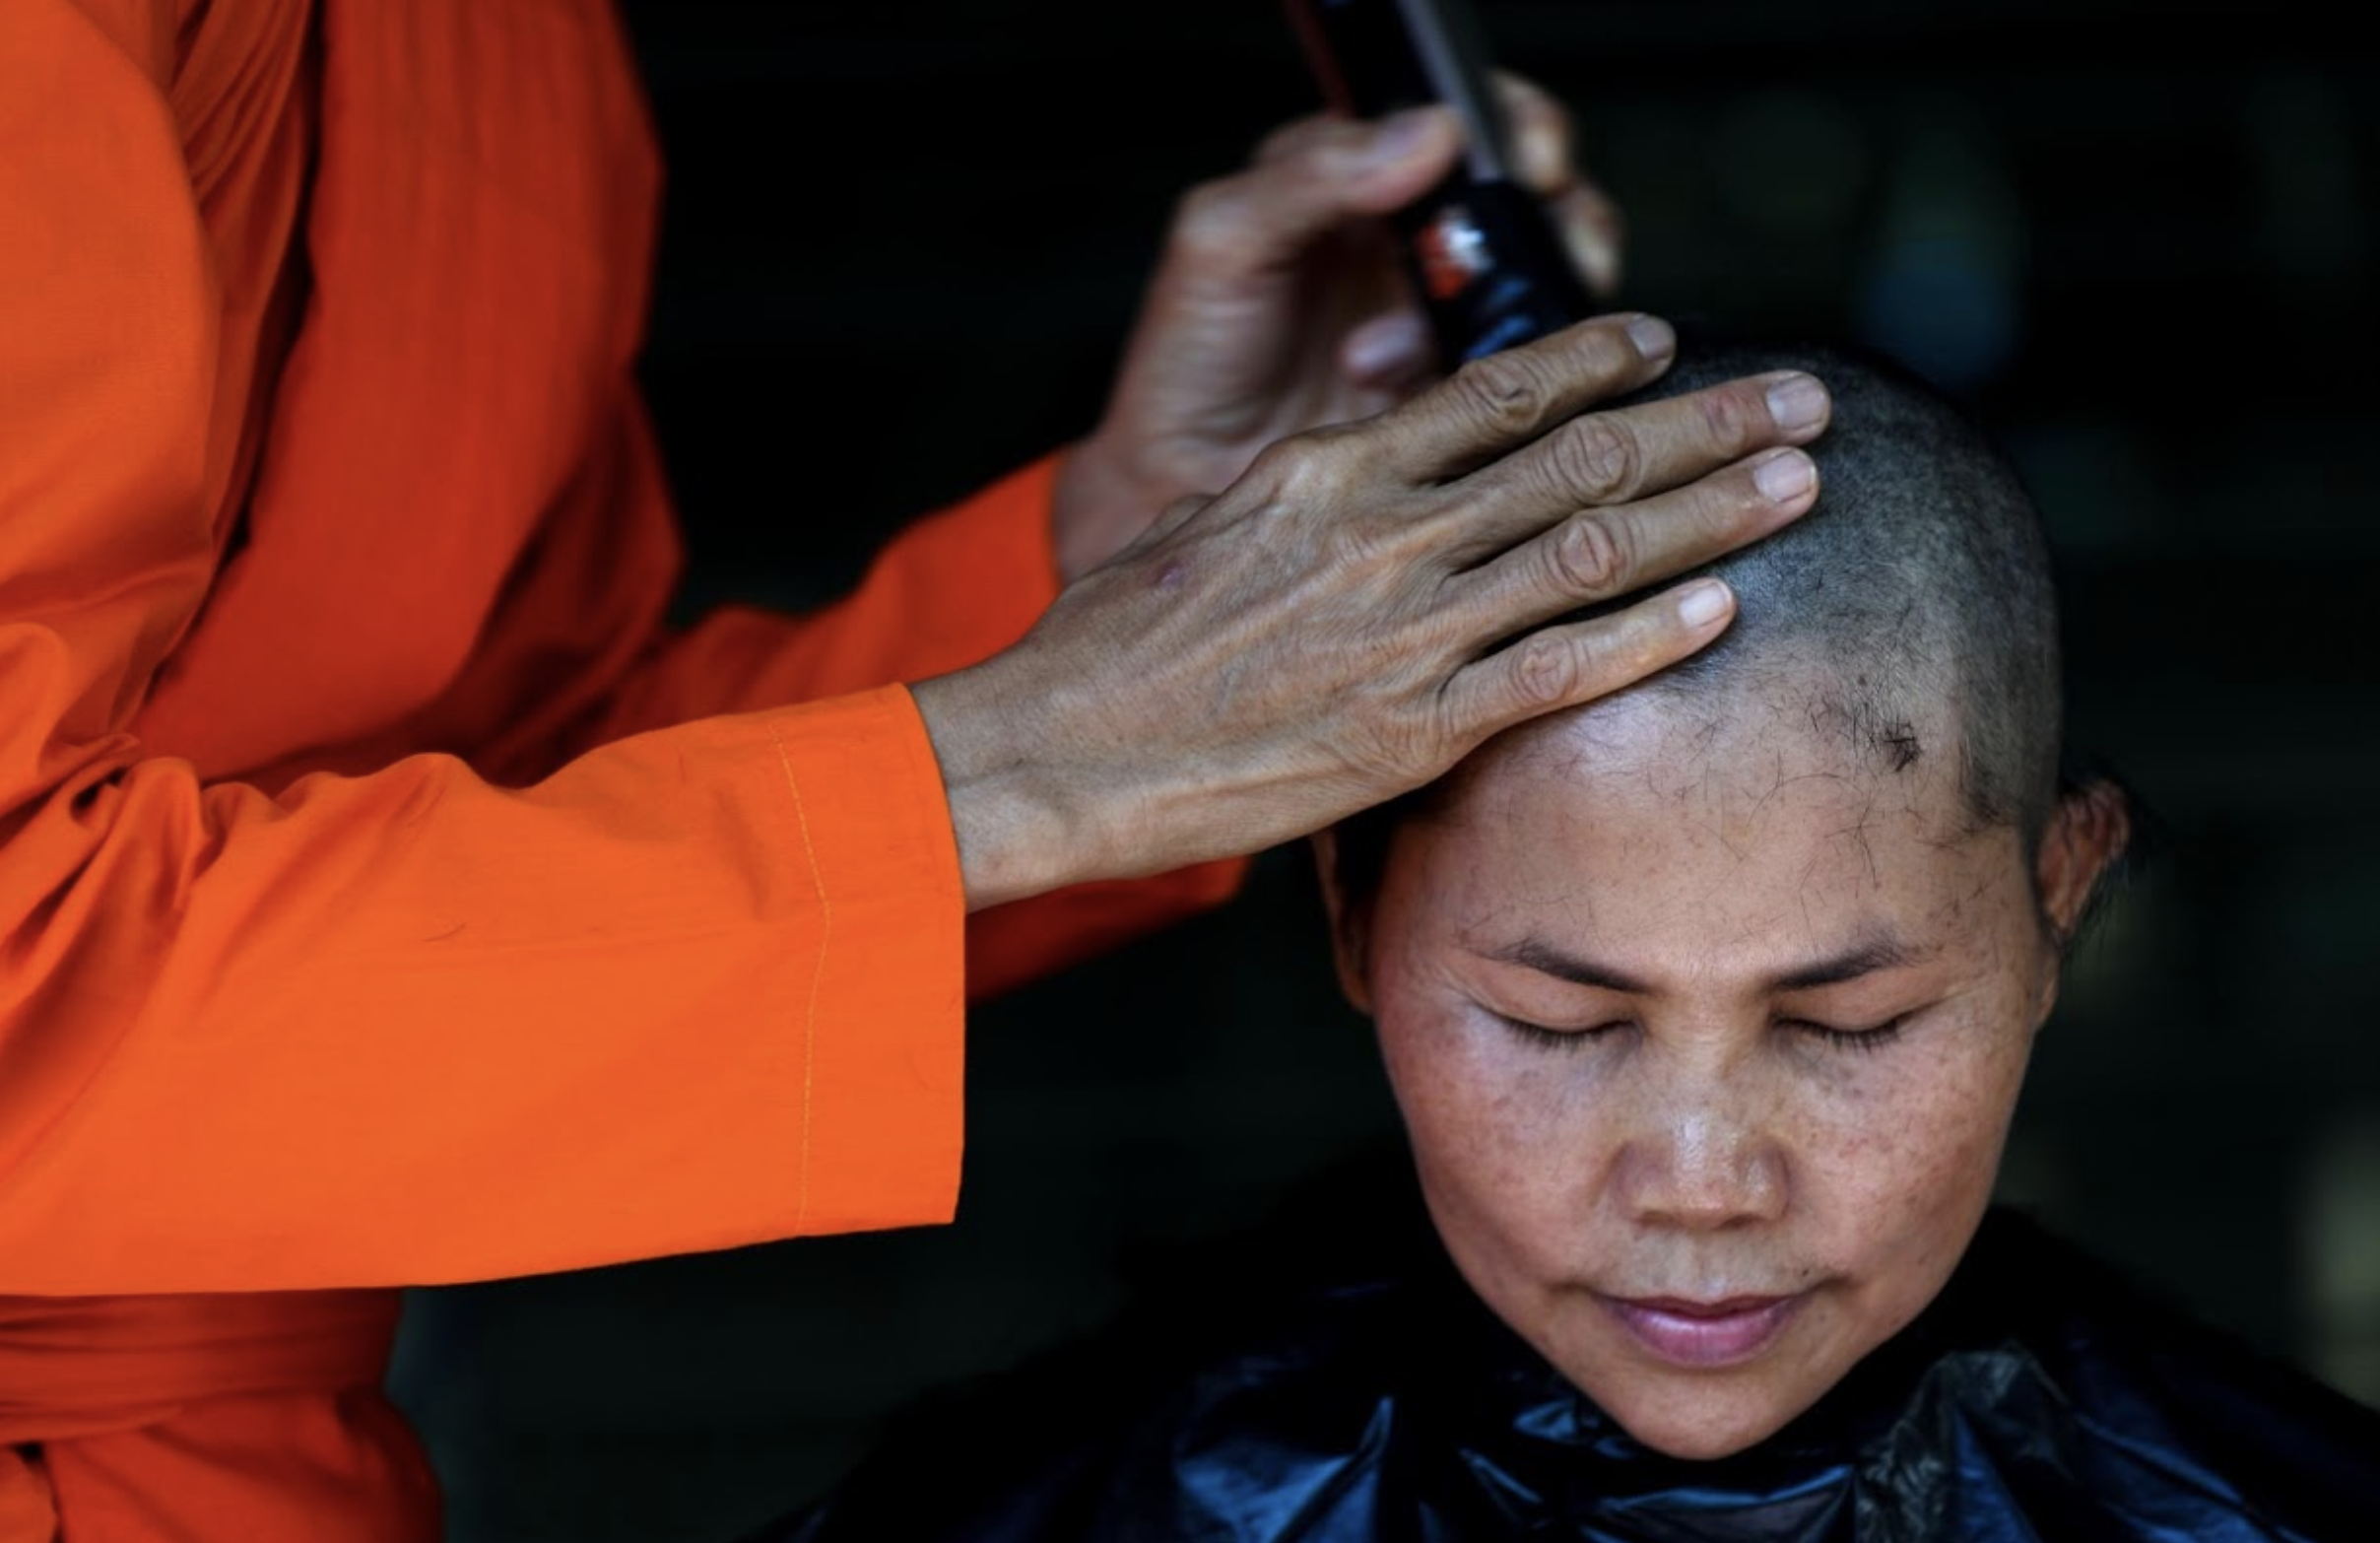 Young Thai woman having her head shaved